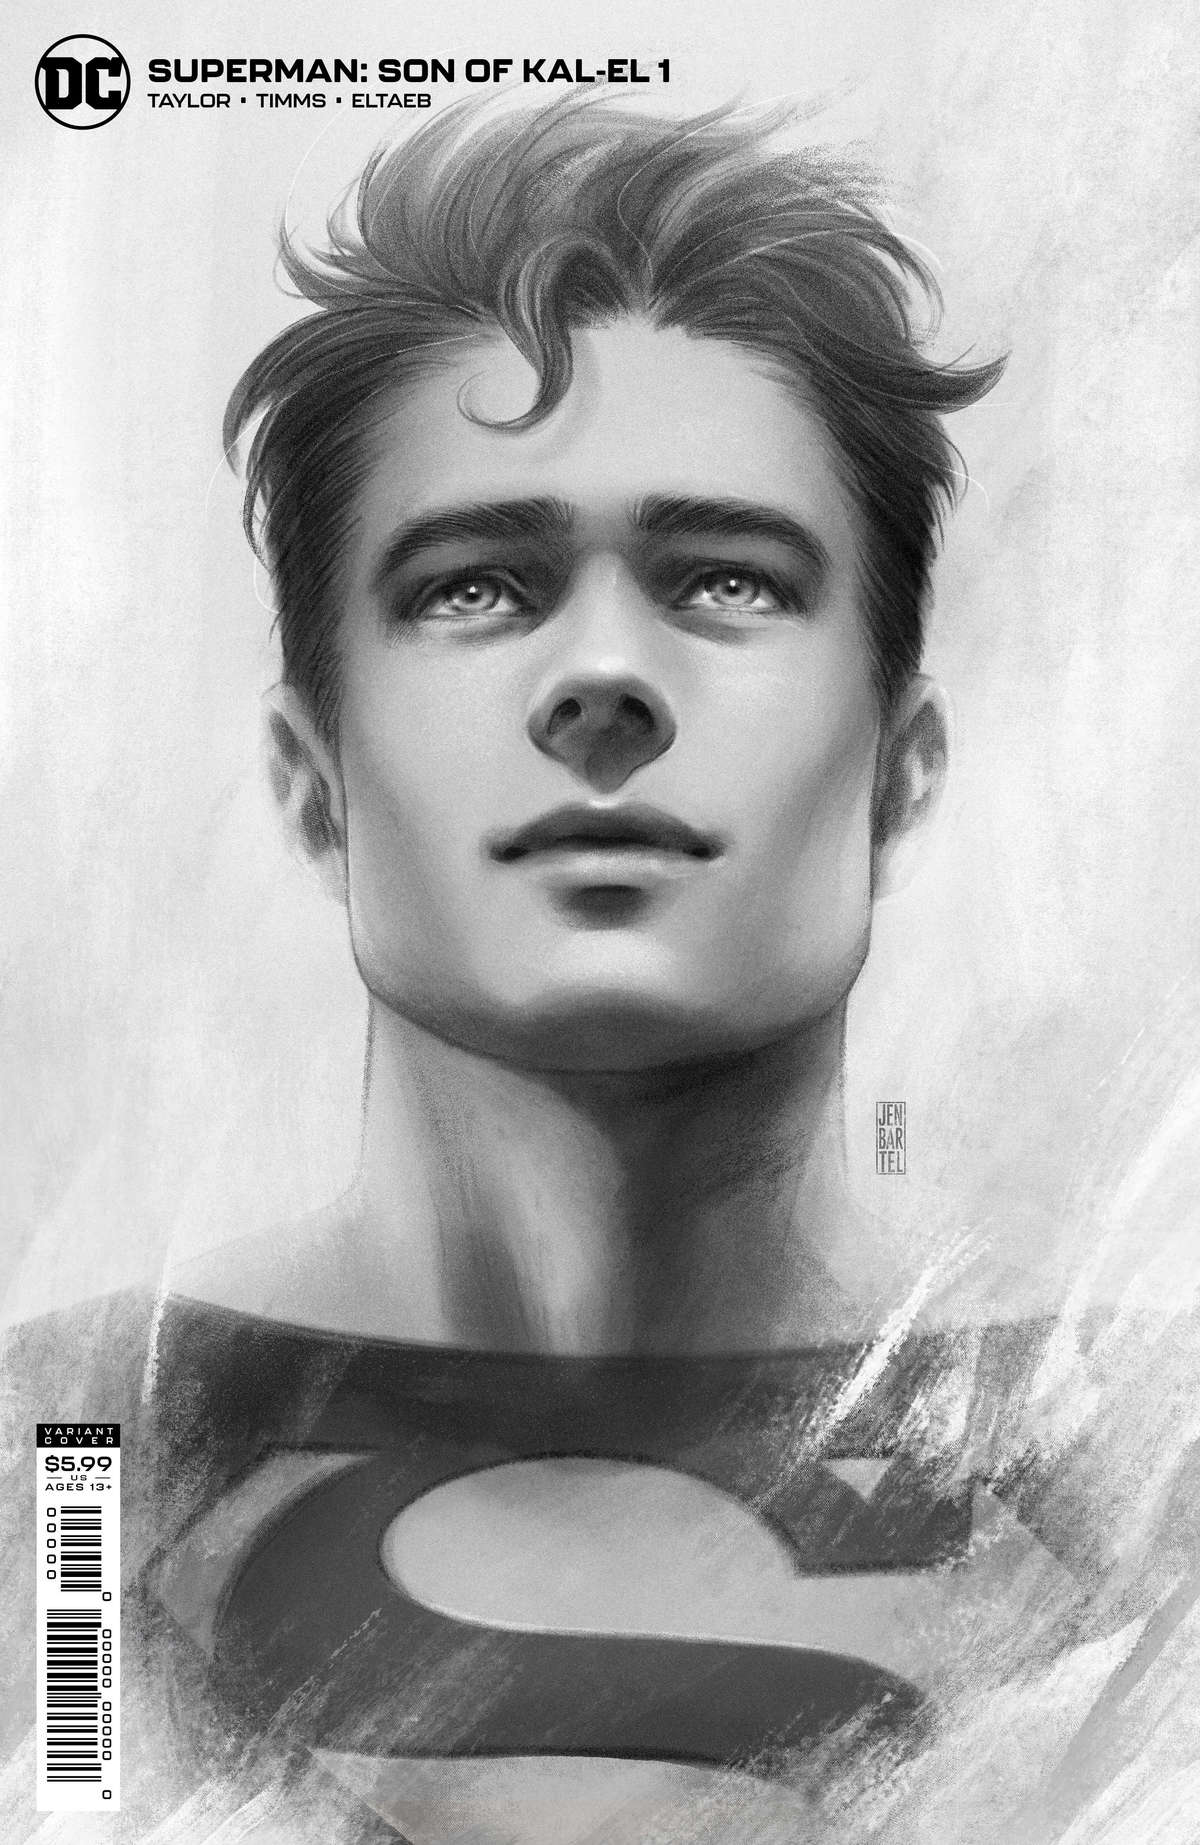 DC Comics reveals Clark Kent's son taking over as the new Superman this  summer